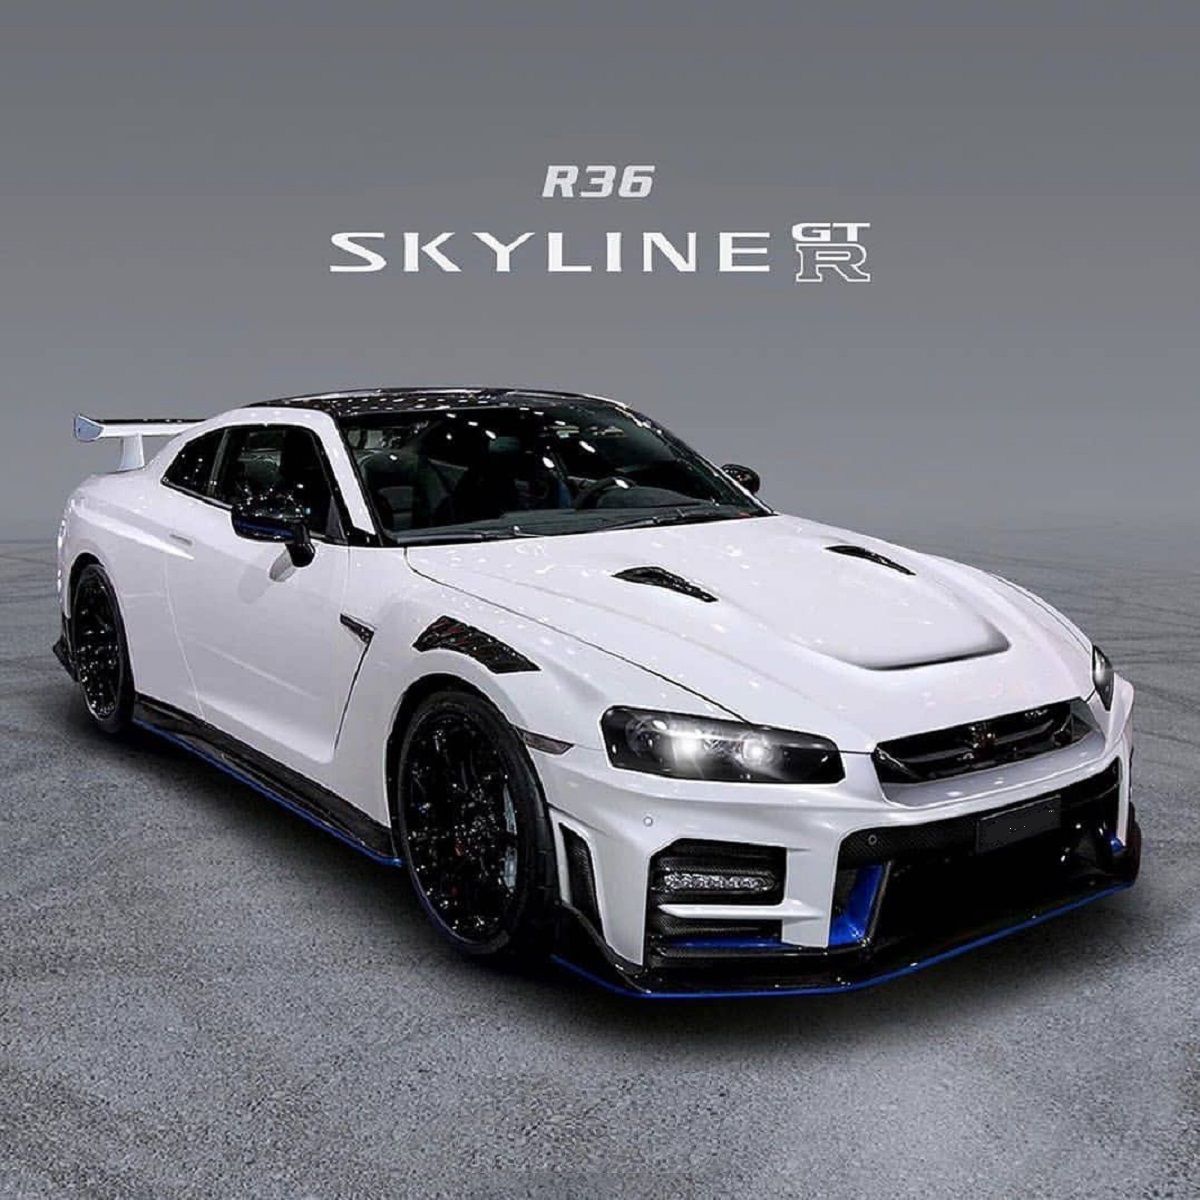 The Exterior Of 2021 Nissan GT R R36 Skyline Is Looking Sporty. This Model Will Draw Styling Cues From The Vision Gran Turi. Nissan Gtr, Nissan Gt, Nissan Skyline